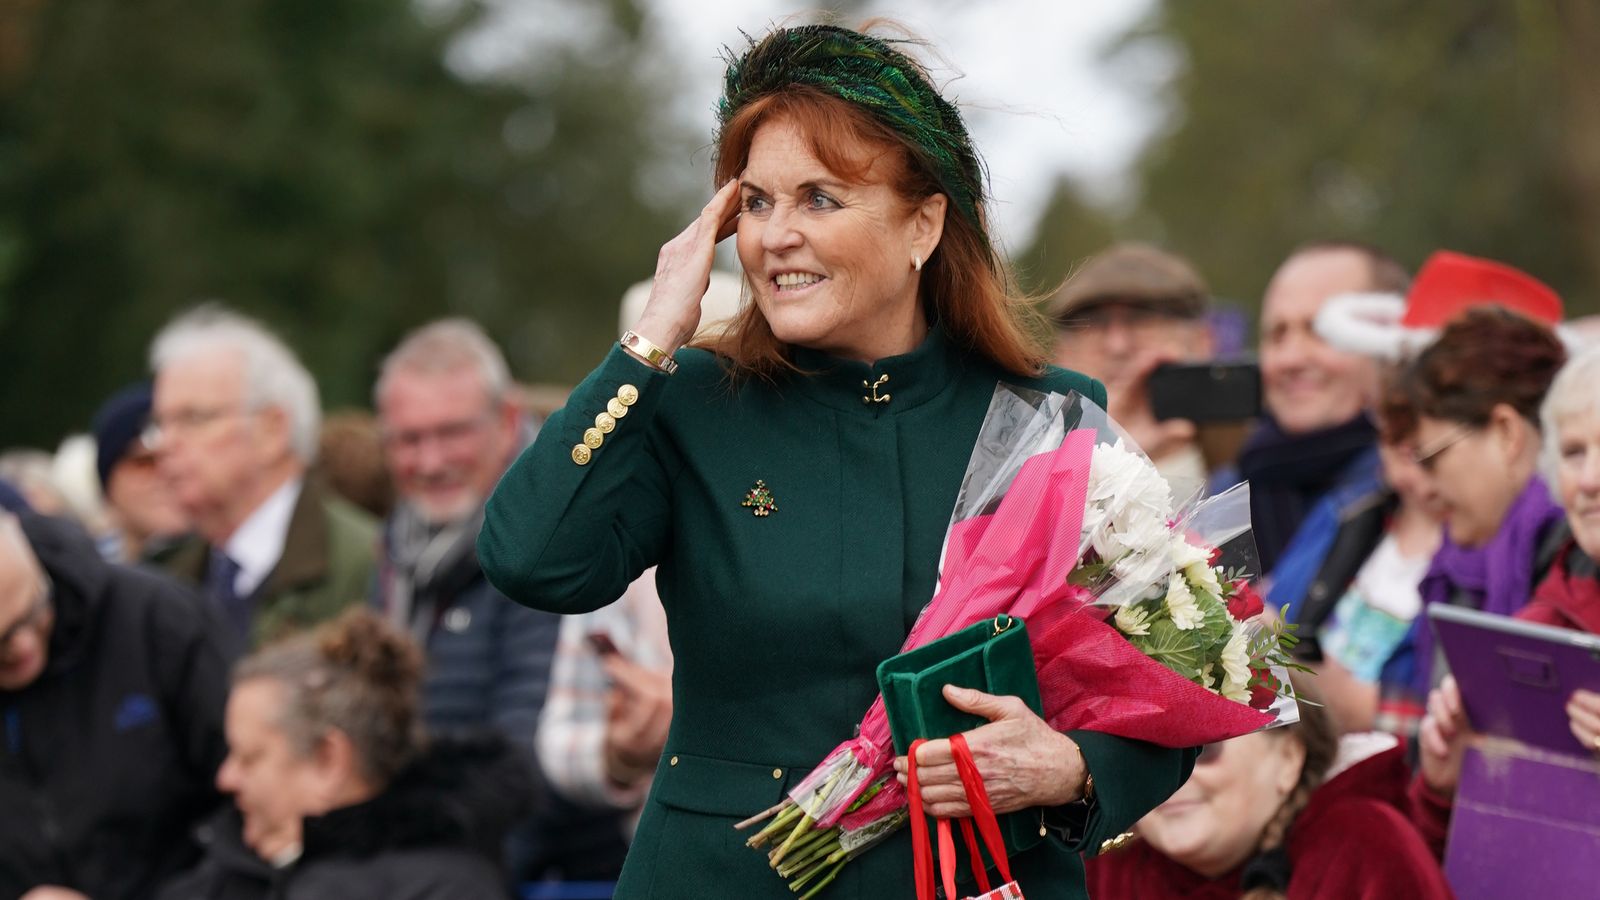 King's Christmas message: Sarah Ferguson's appearance at Sandringham could hint at a way back for Harry and Meghan